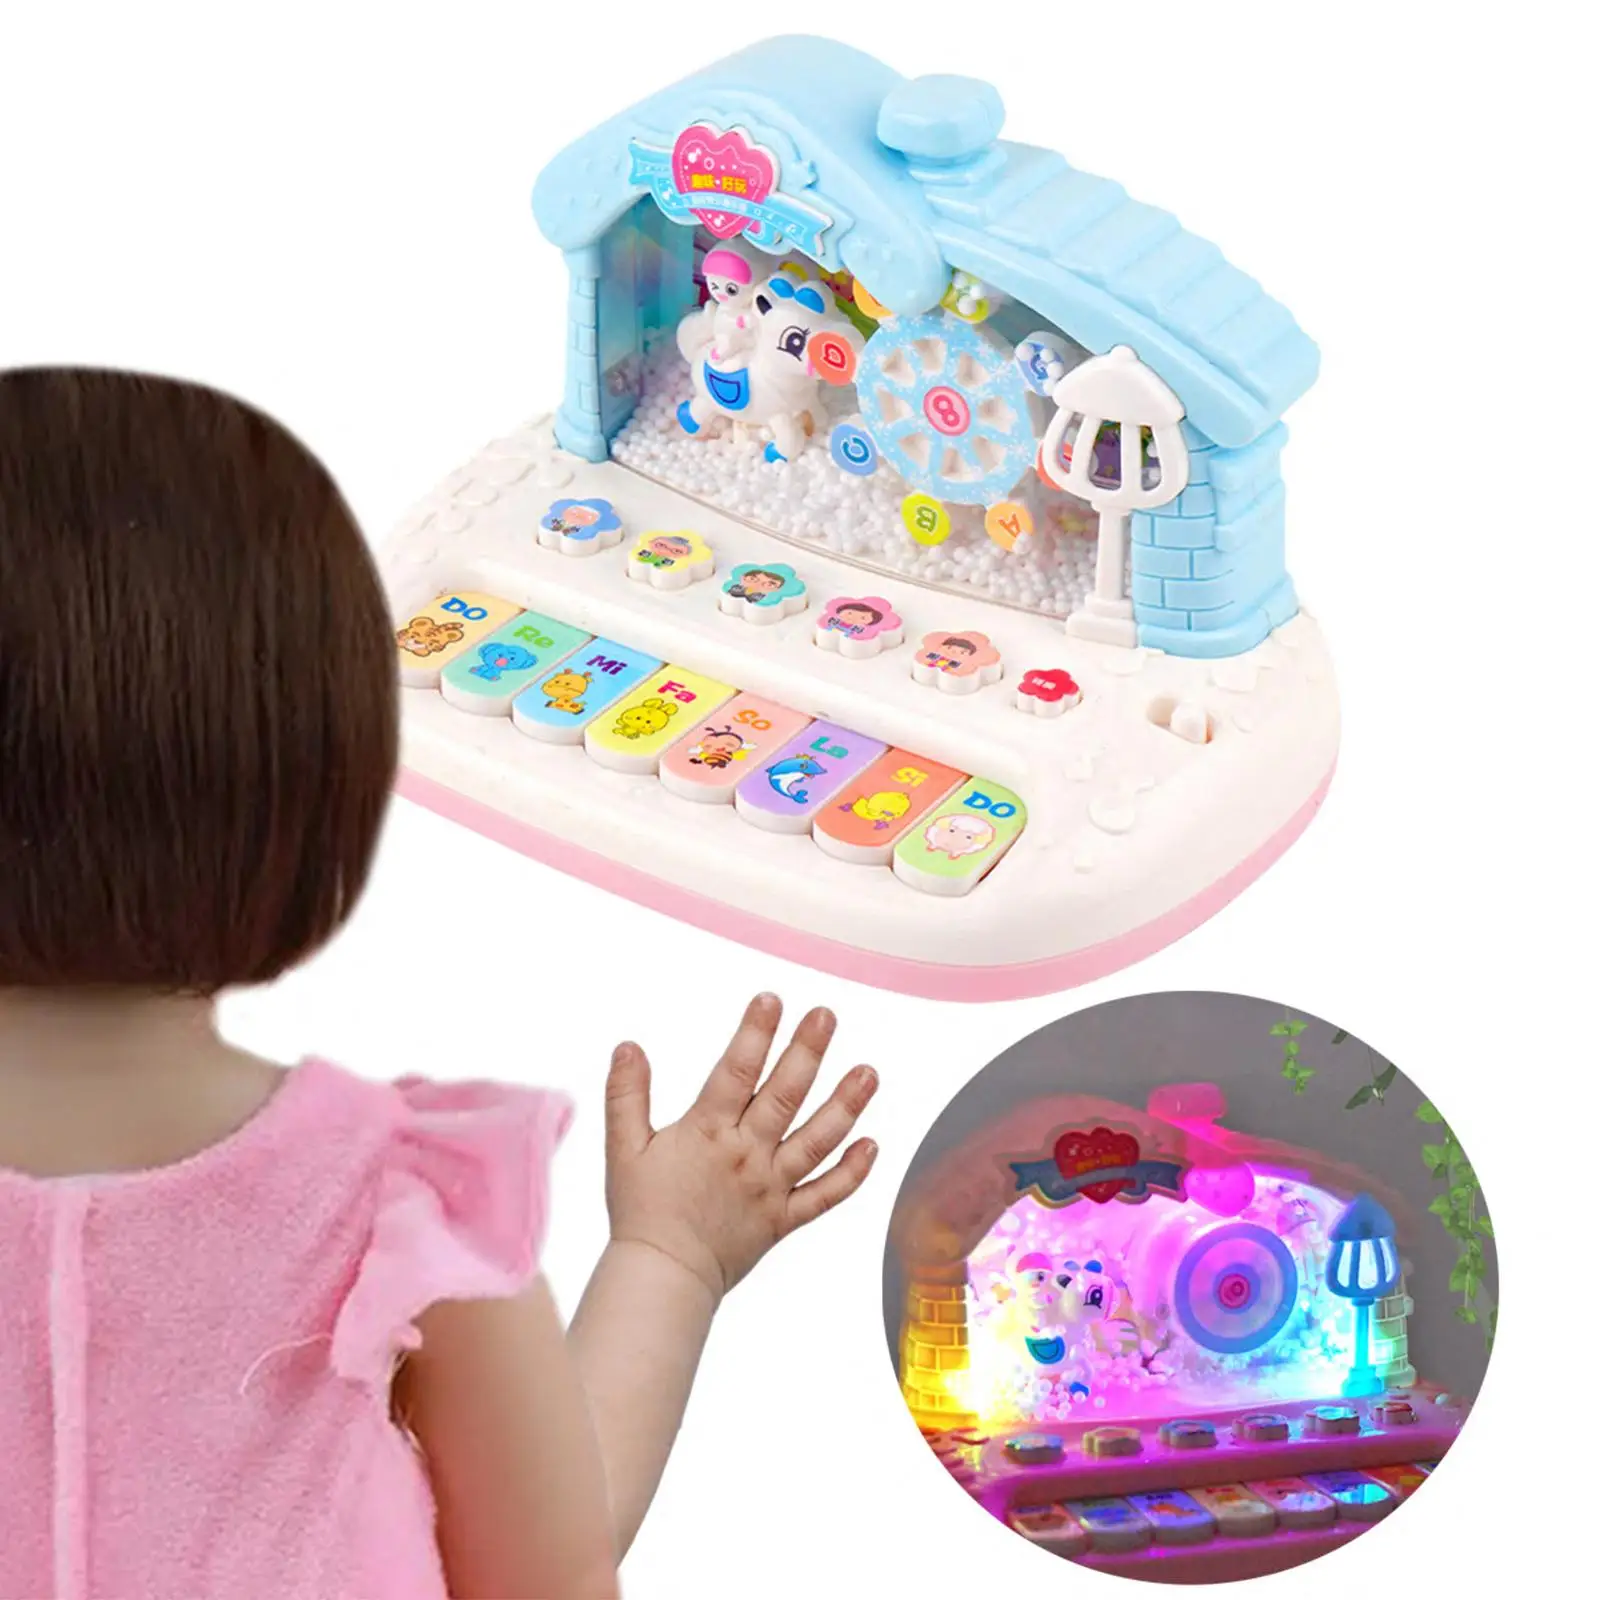 Electronic Piano Toy Digital Electric Music Keyboard Toy Children Piano Toy for Boys Girls Kids 1 2 3 Year Old Birthday Gifts